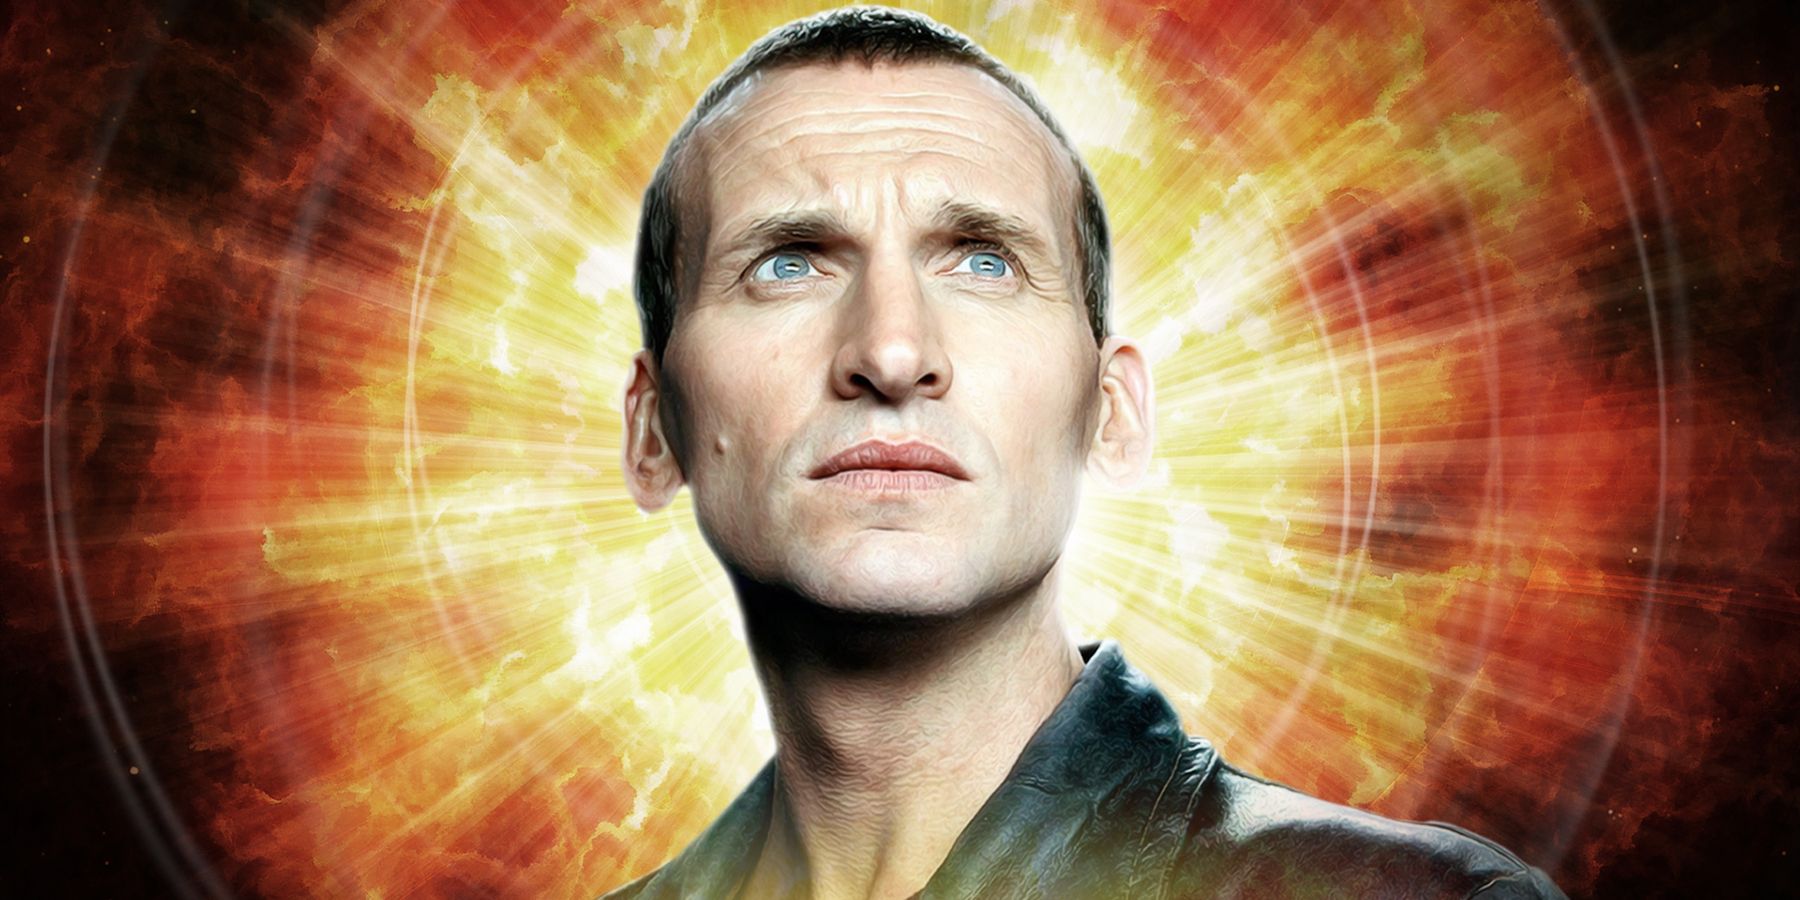 Ninth Doctor from Doctor Who concerned in front of red and orange background.